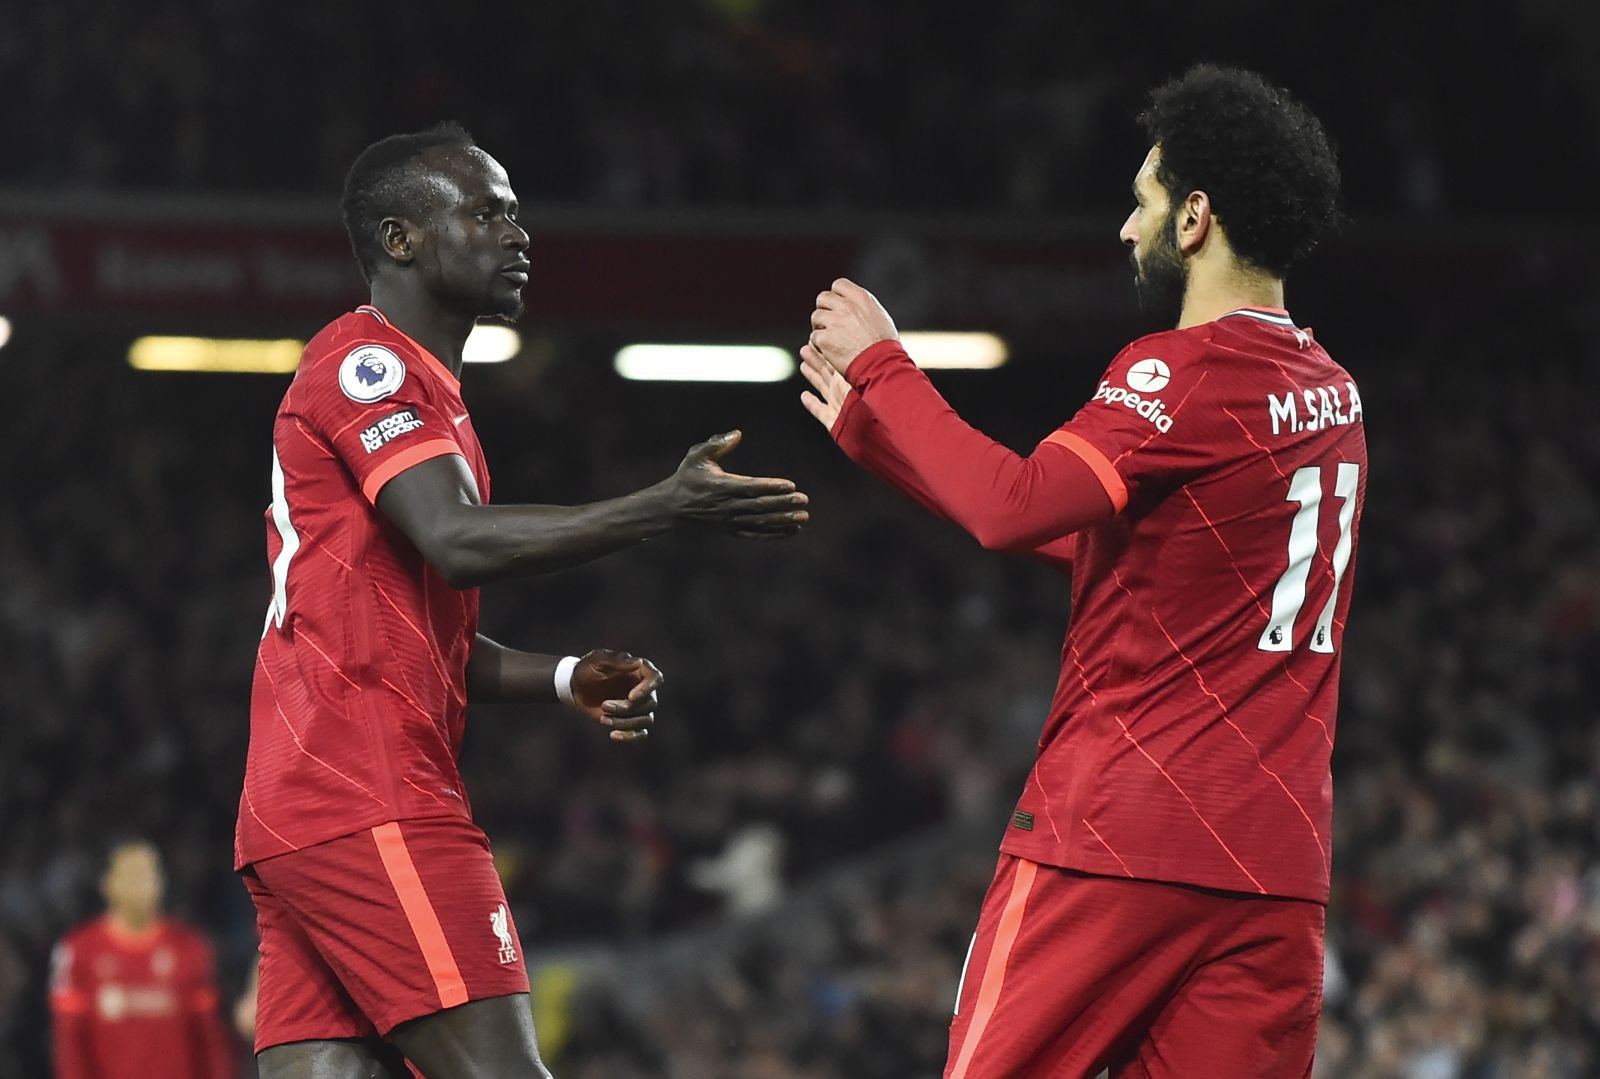 epa09897930 Sadio Mane (L) of Liverpool celebrates with teammate Mohamed Salah (R) after scoring the 3-0 goal during the English Premier League soccer match between Liverpool and Manchester United in Liverpool, Britain, 19 April 2022.  EPA/PETER POWELL EDITORIAL USE ONLY. No use with unauthorized audio, video, data, fixture lists, club/league logos or 'live' services. Online in-match use limited to 120 images, no video emulation. No use in betting, games or single club/league/player publications